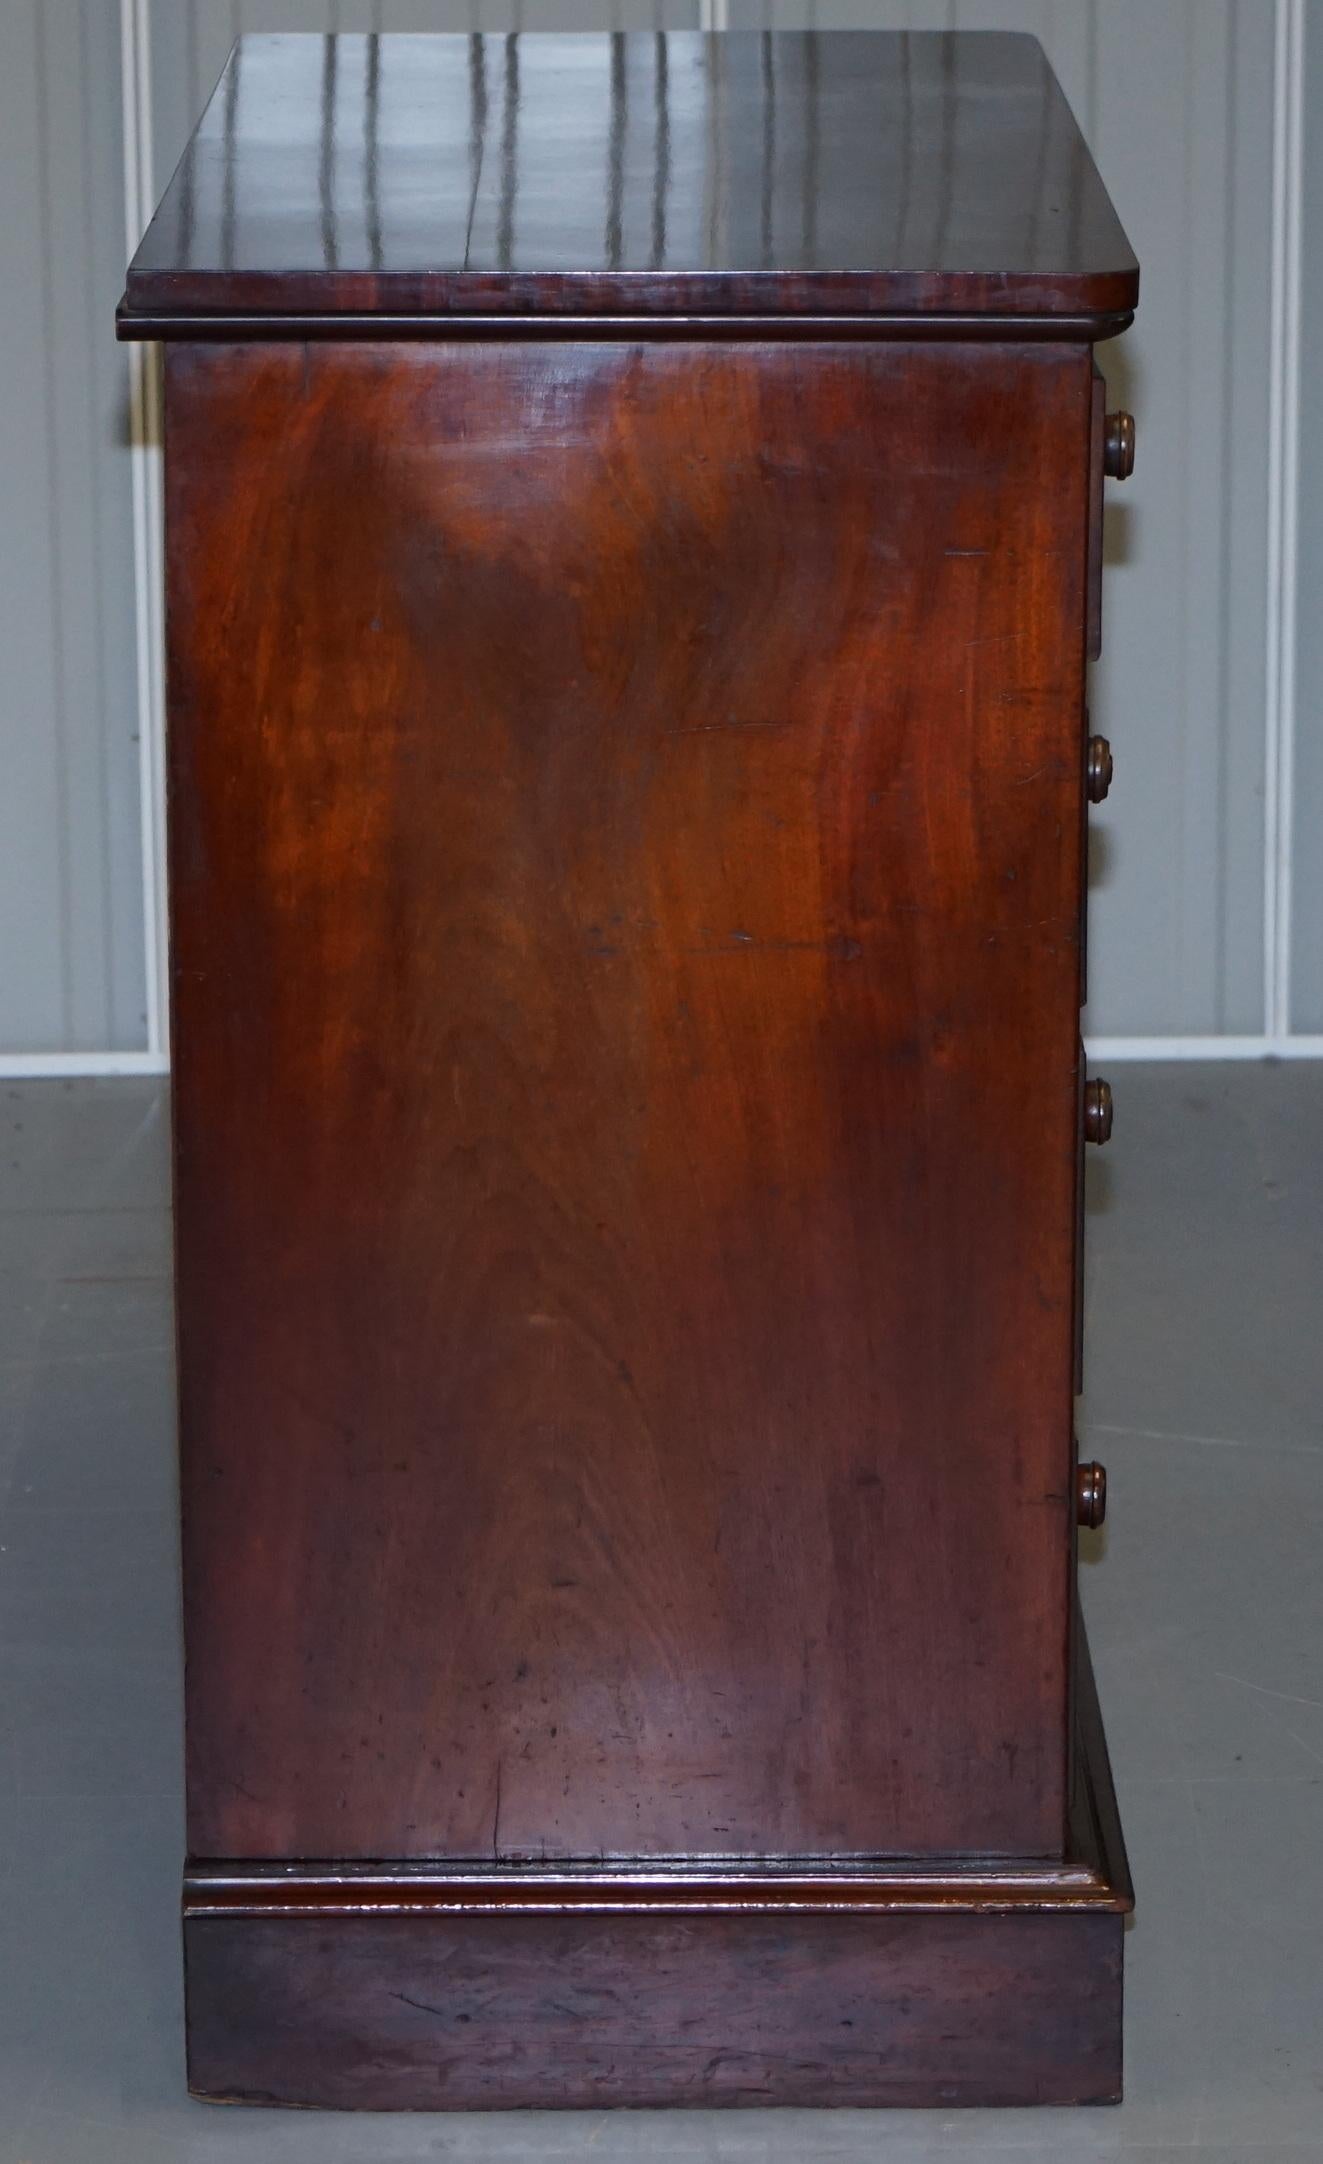 Rare circa 1760 Thomas Wilson 68 Great Queen Street Hardwood Chest of Drawers For Sale 7